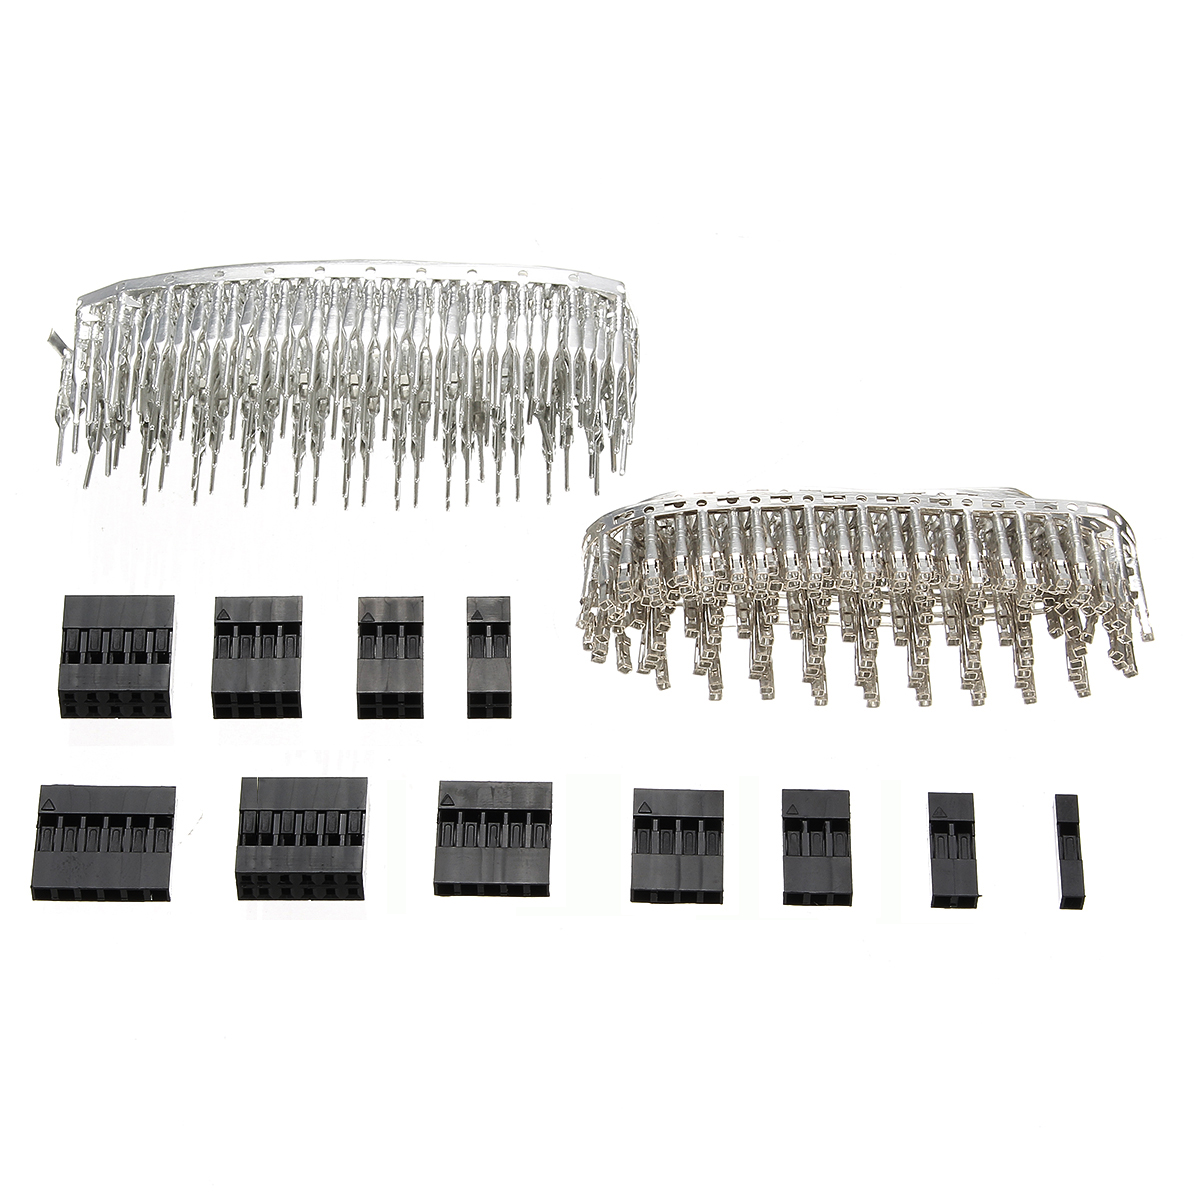 Excellway-TC10-620pcs-Wire-Jumper-Pin-Header-Connector-Housing-Kit-For-Dupont-and-Crimp-Pins-1132947-6